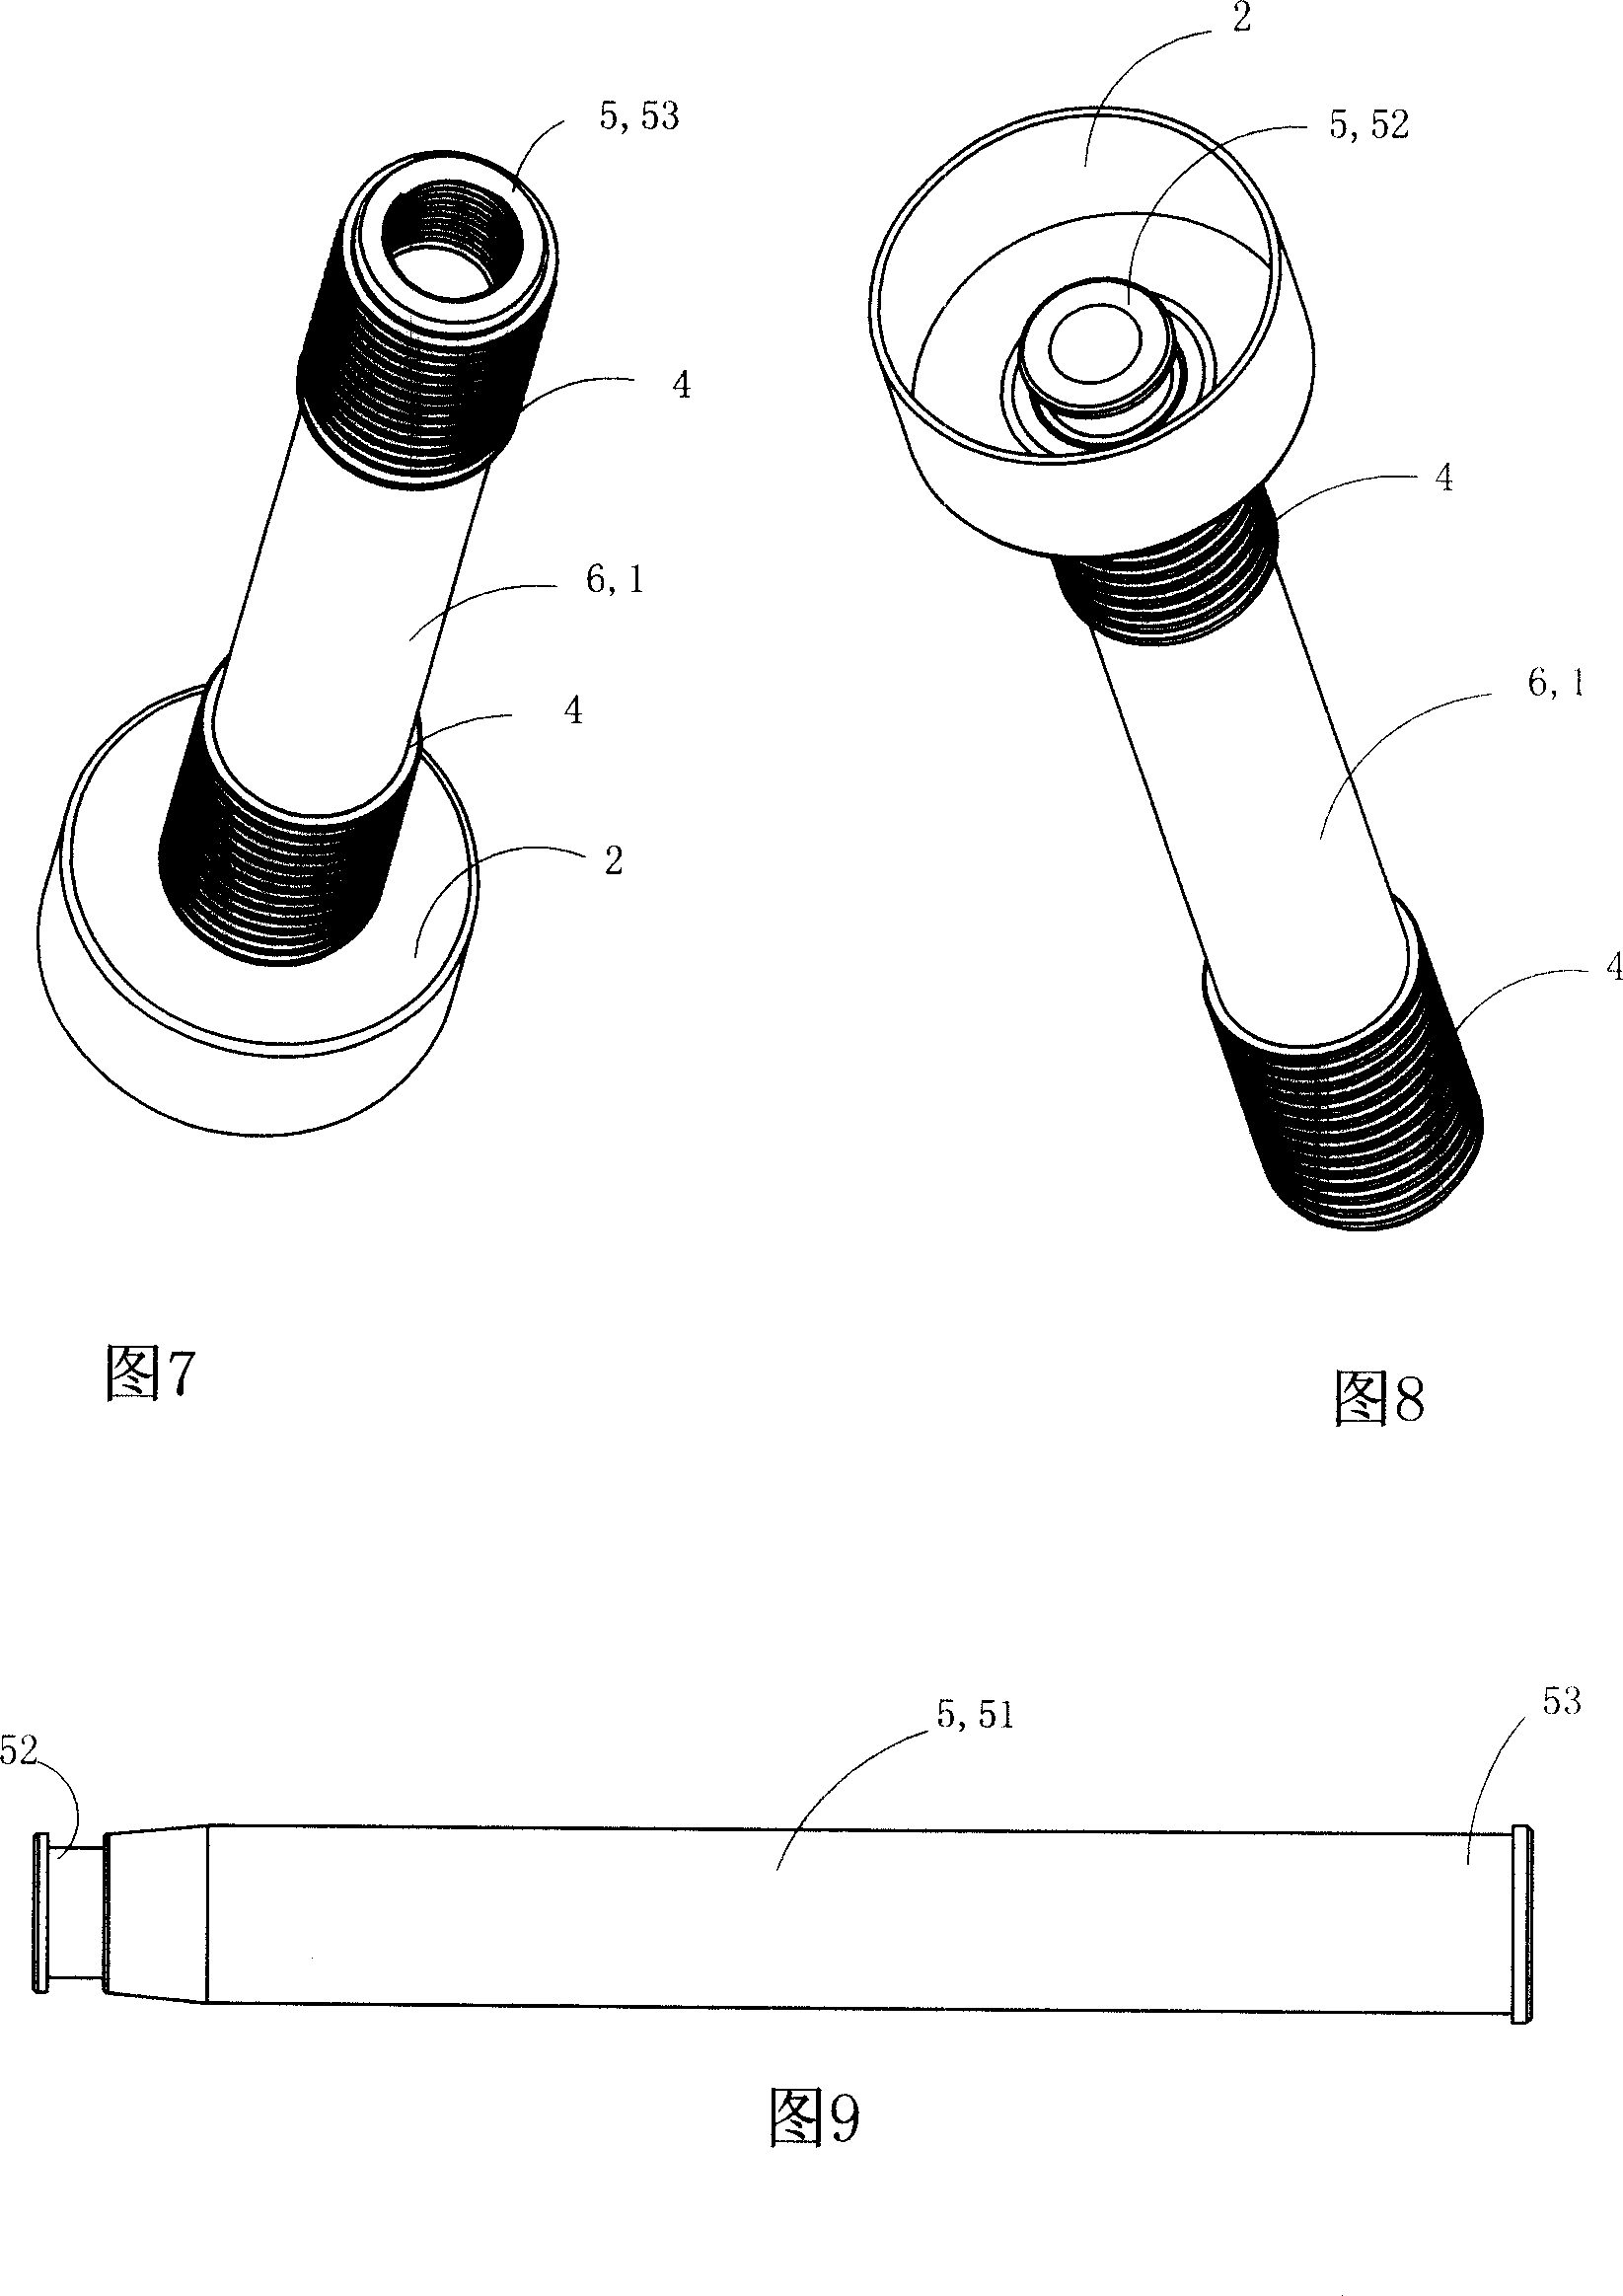 Insulating shield and conductive rod assembly